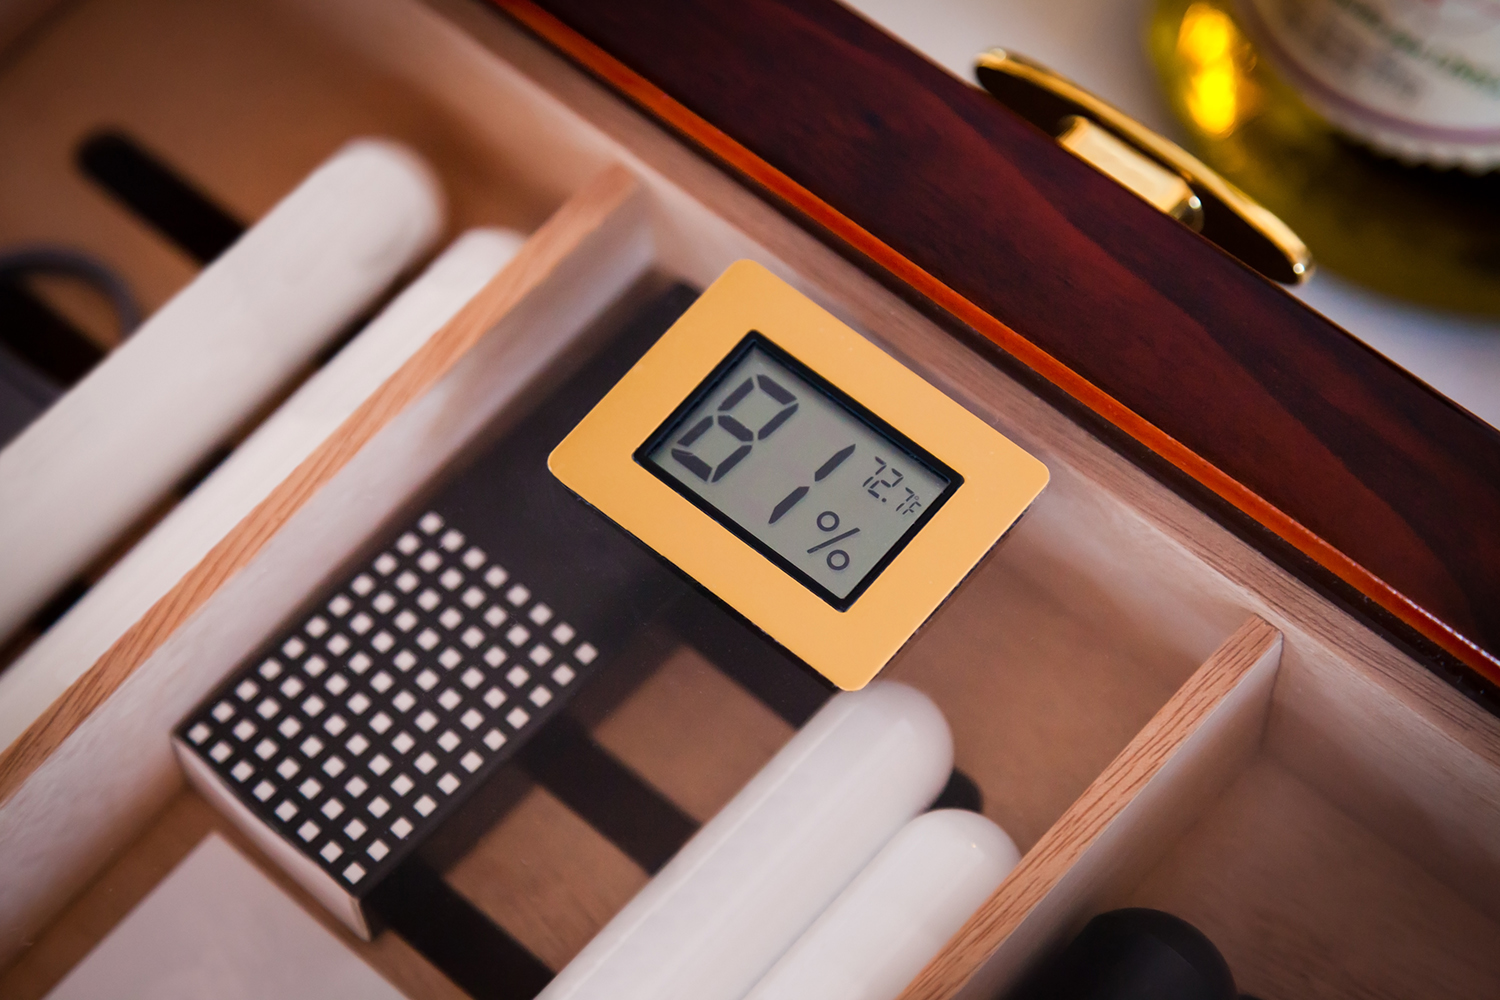 Cigar humidor gauge that shows percentage and temperature.